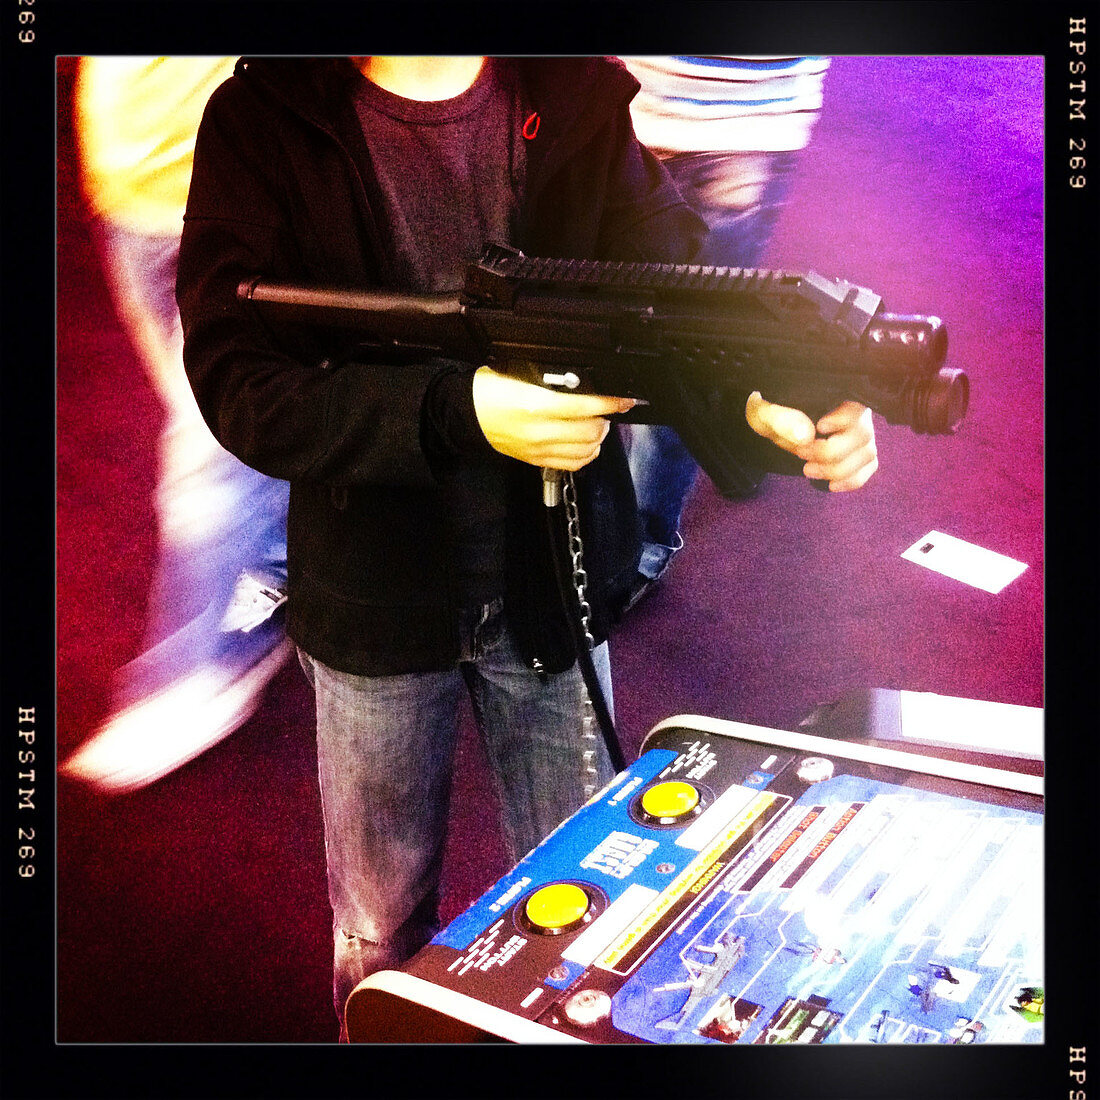 Boy playing at a shooting game in an arcade